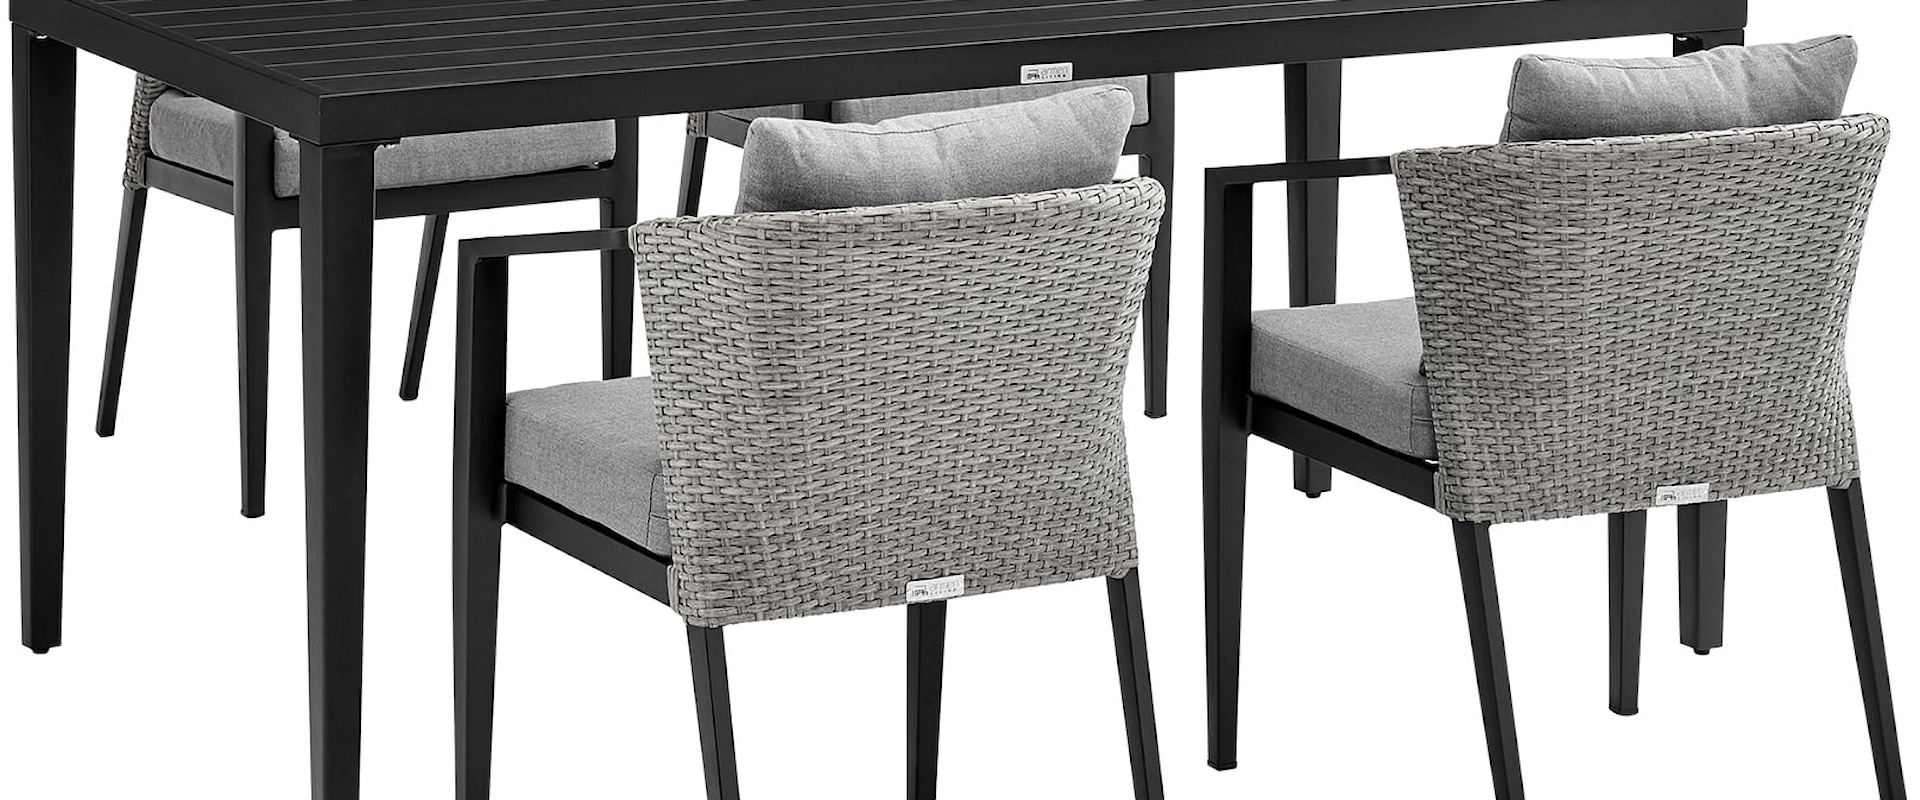 Casual Outdoor Dining Set